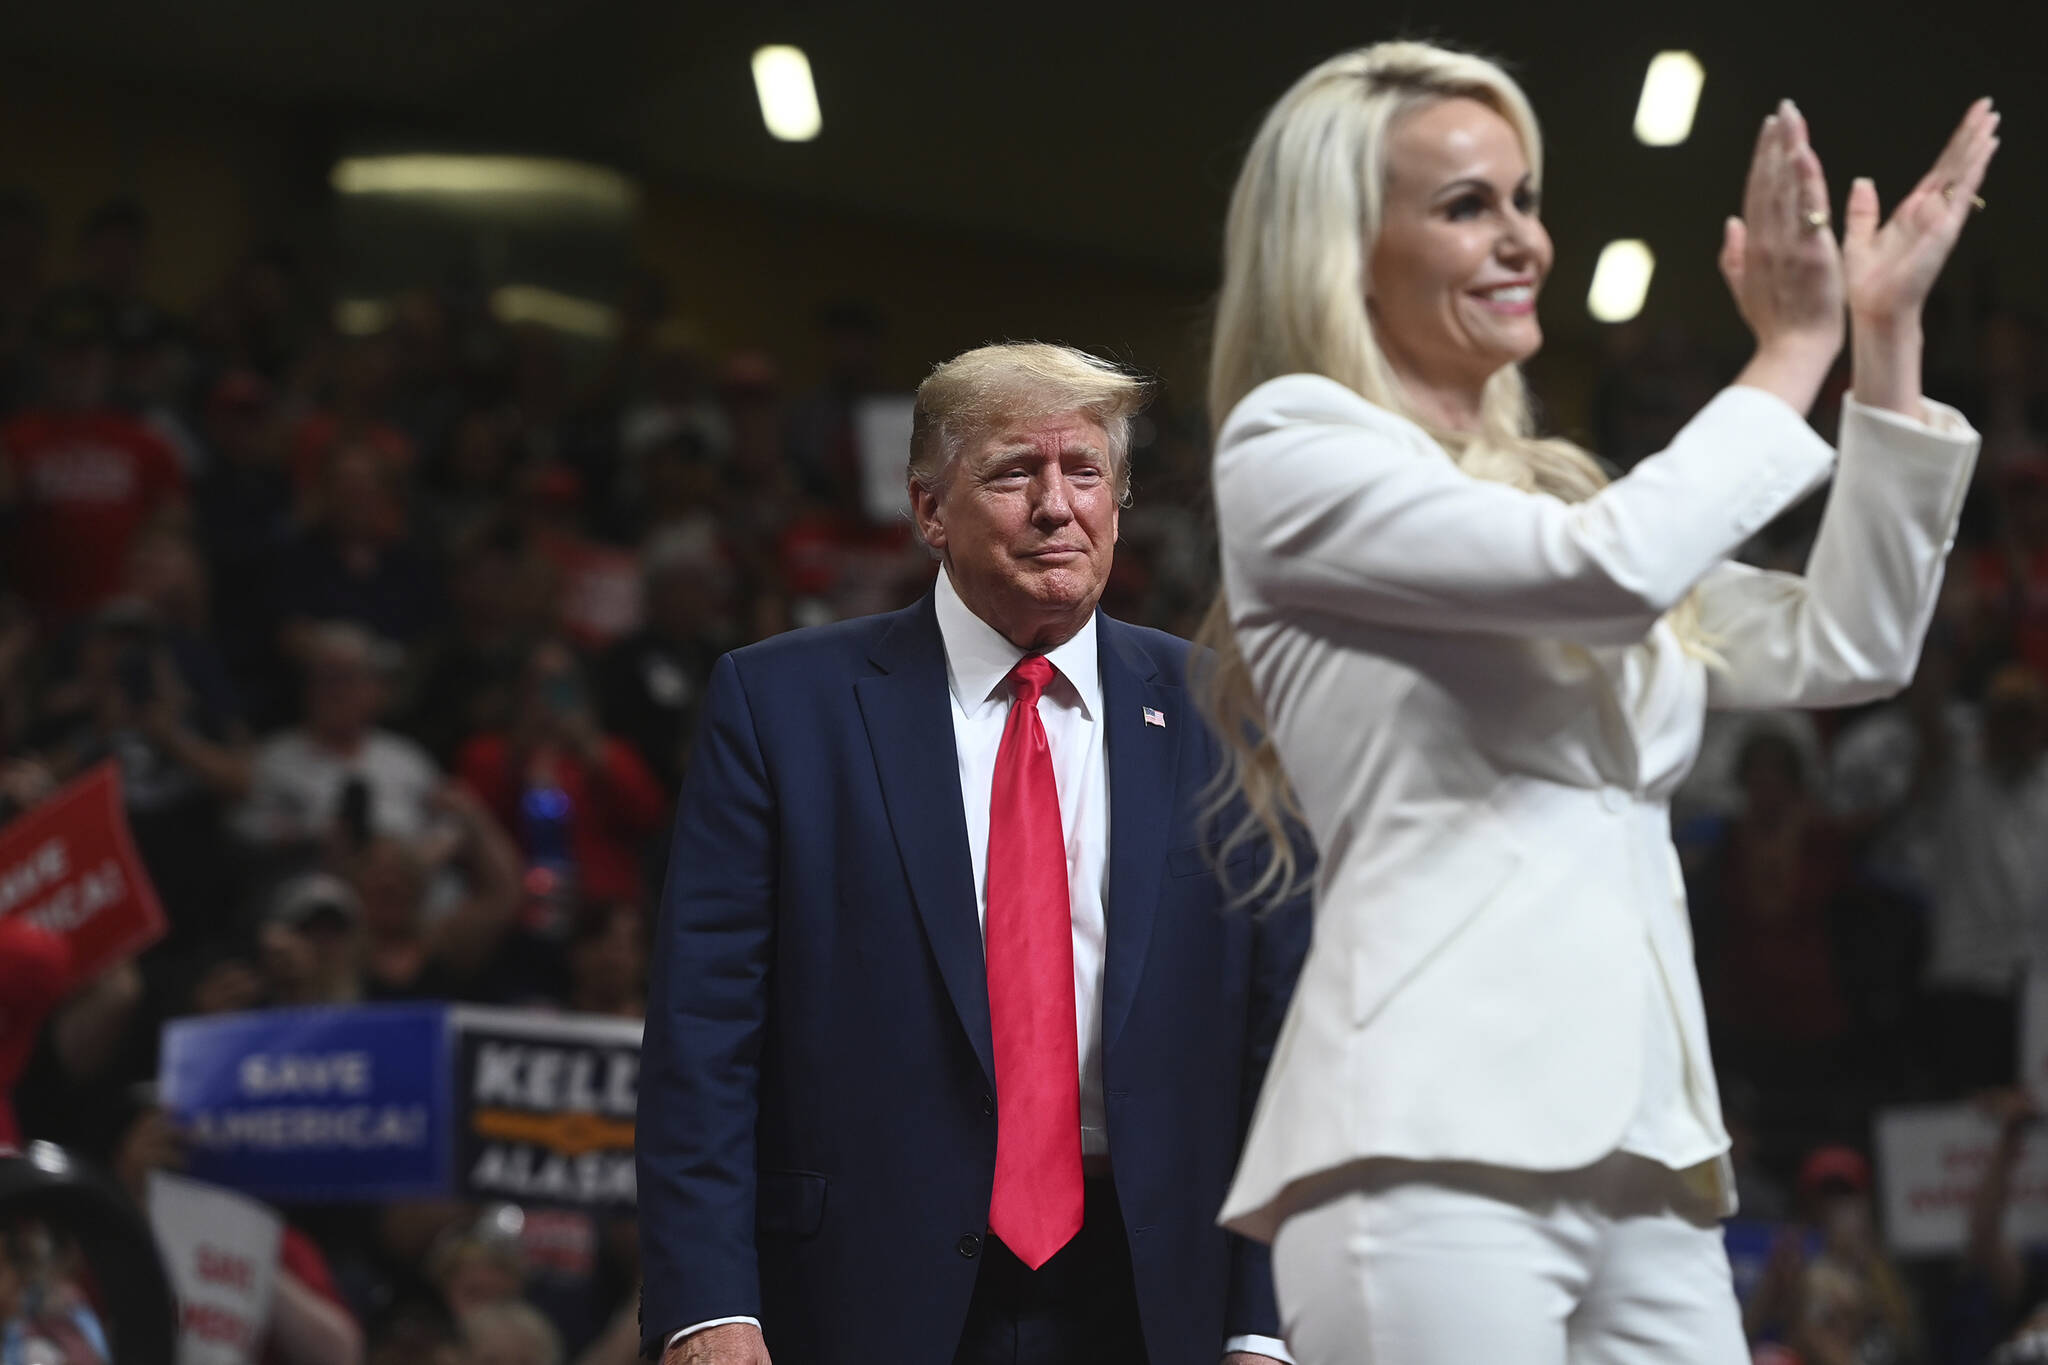 U.S. Senate candidate Kelly Tshibaka joins Donald Trump on stage during a rally at the Alaska Airlines Center on July 9, 2022, in Anchorage, Alaska. Tshibaka is seeking to become one of four candidates to advance in the U.S. Senate race during Alaska’s primary election Tuesday, Aug. 16. (Bill Roth/Anchorage Daily News via AP, File)
U.S. Senate candidate Kelly Tshibaka joins Donald Trump on stage during a rally at the Alaska Airlines Center on July 9, 2022, in Anchorage, Alaska. Tshibaka is seeking to become one of four candidates to advance in the U.S. Senate race during Alaska’s primary election Tuesday, Aug. 16. (Bill Roth/Anchorage Daily News via AP, File)